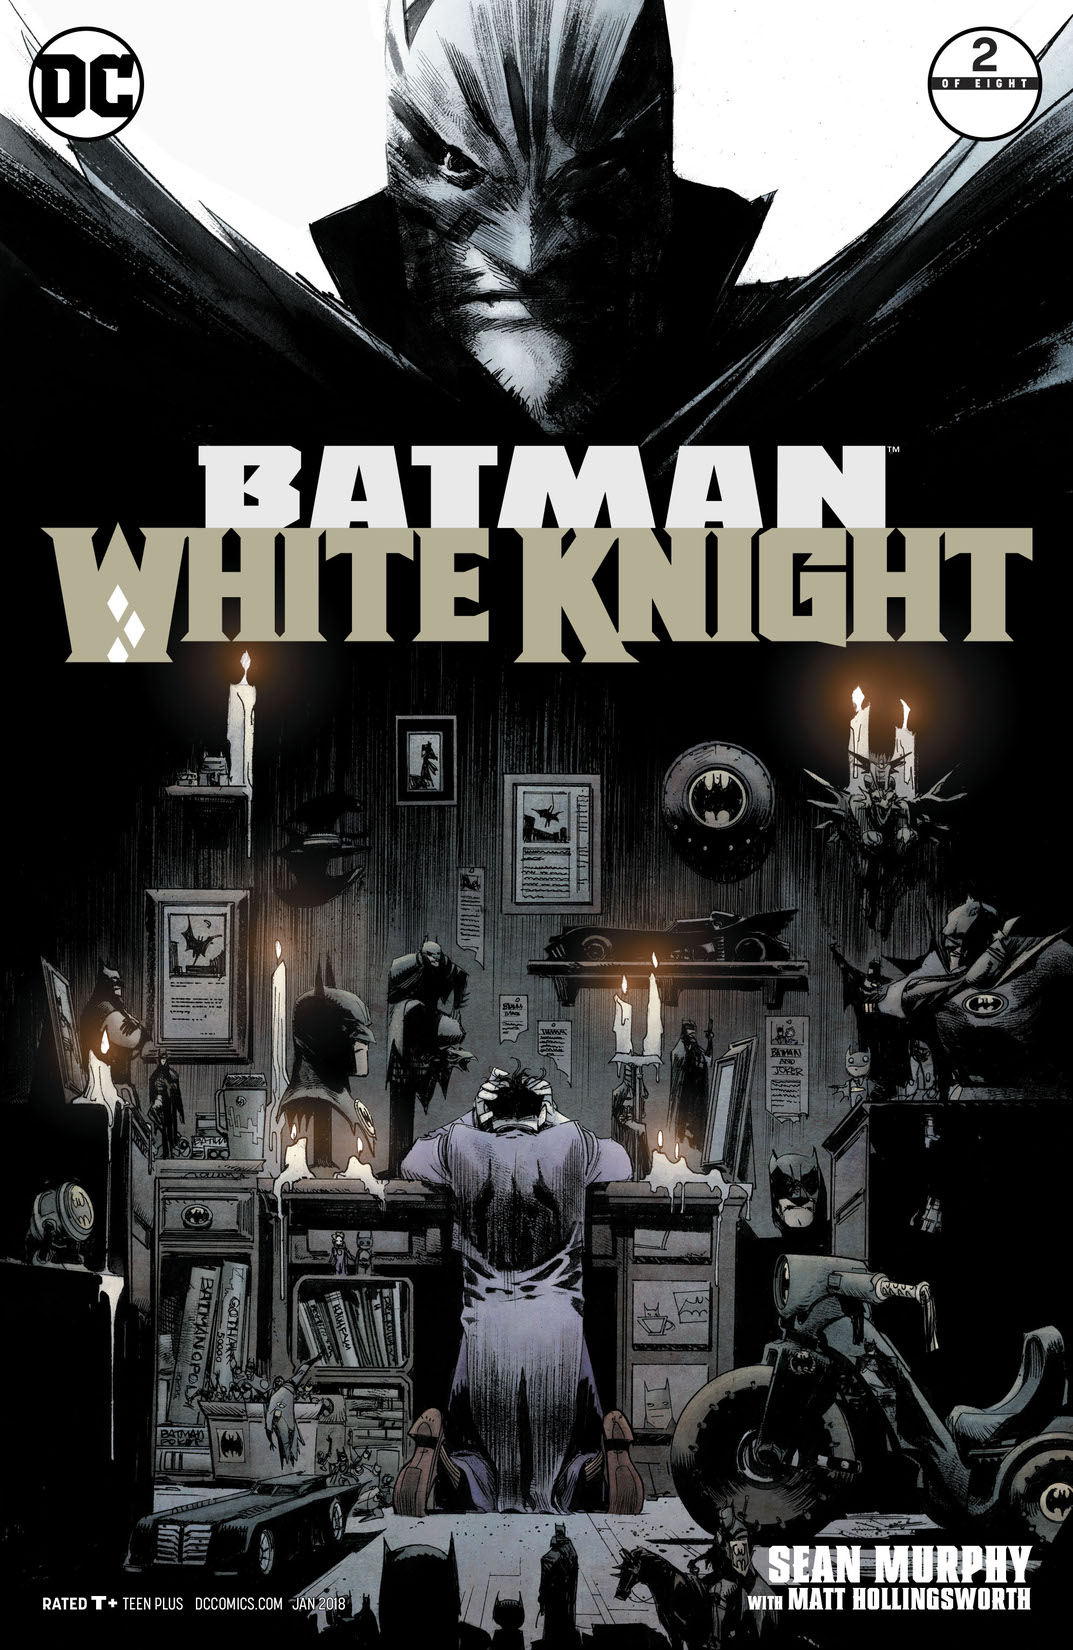 Batman: White Knight #2 preview images